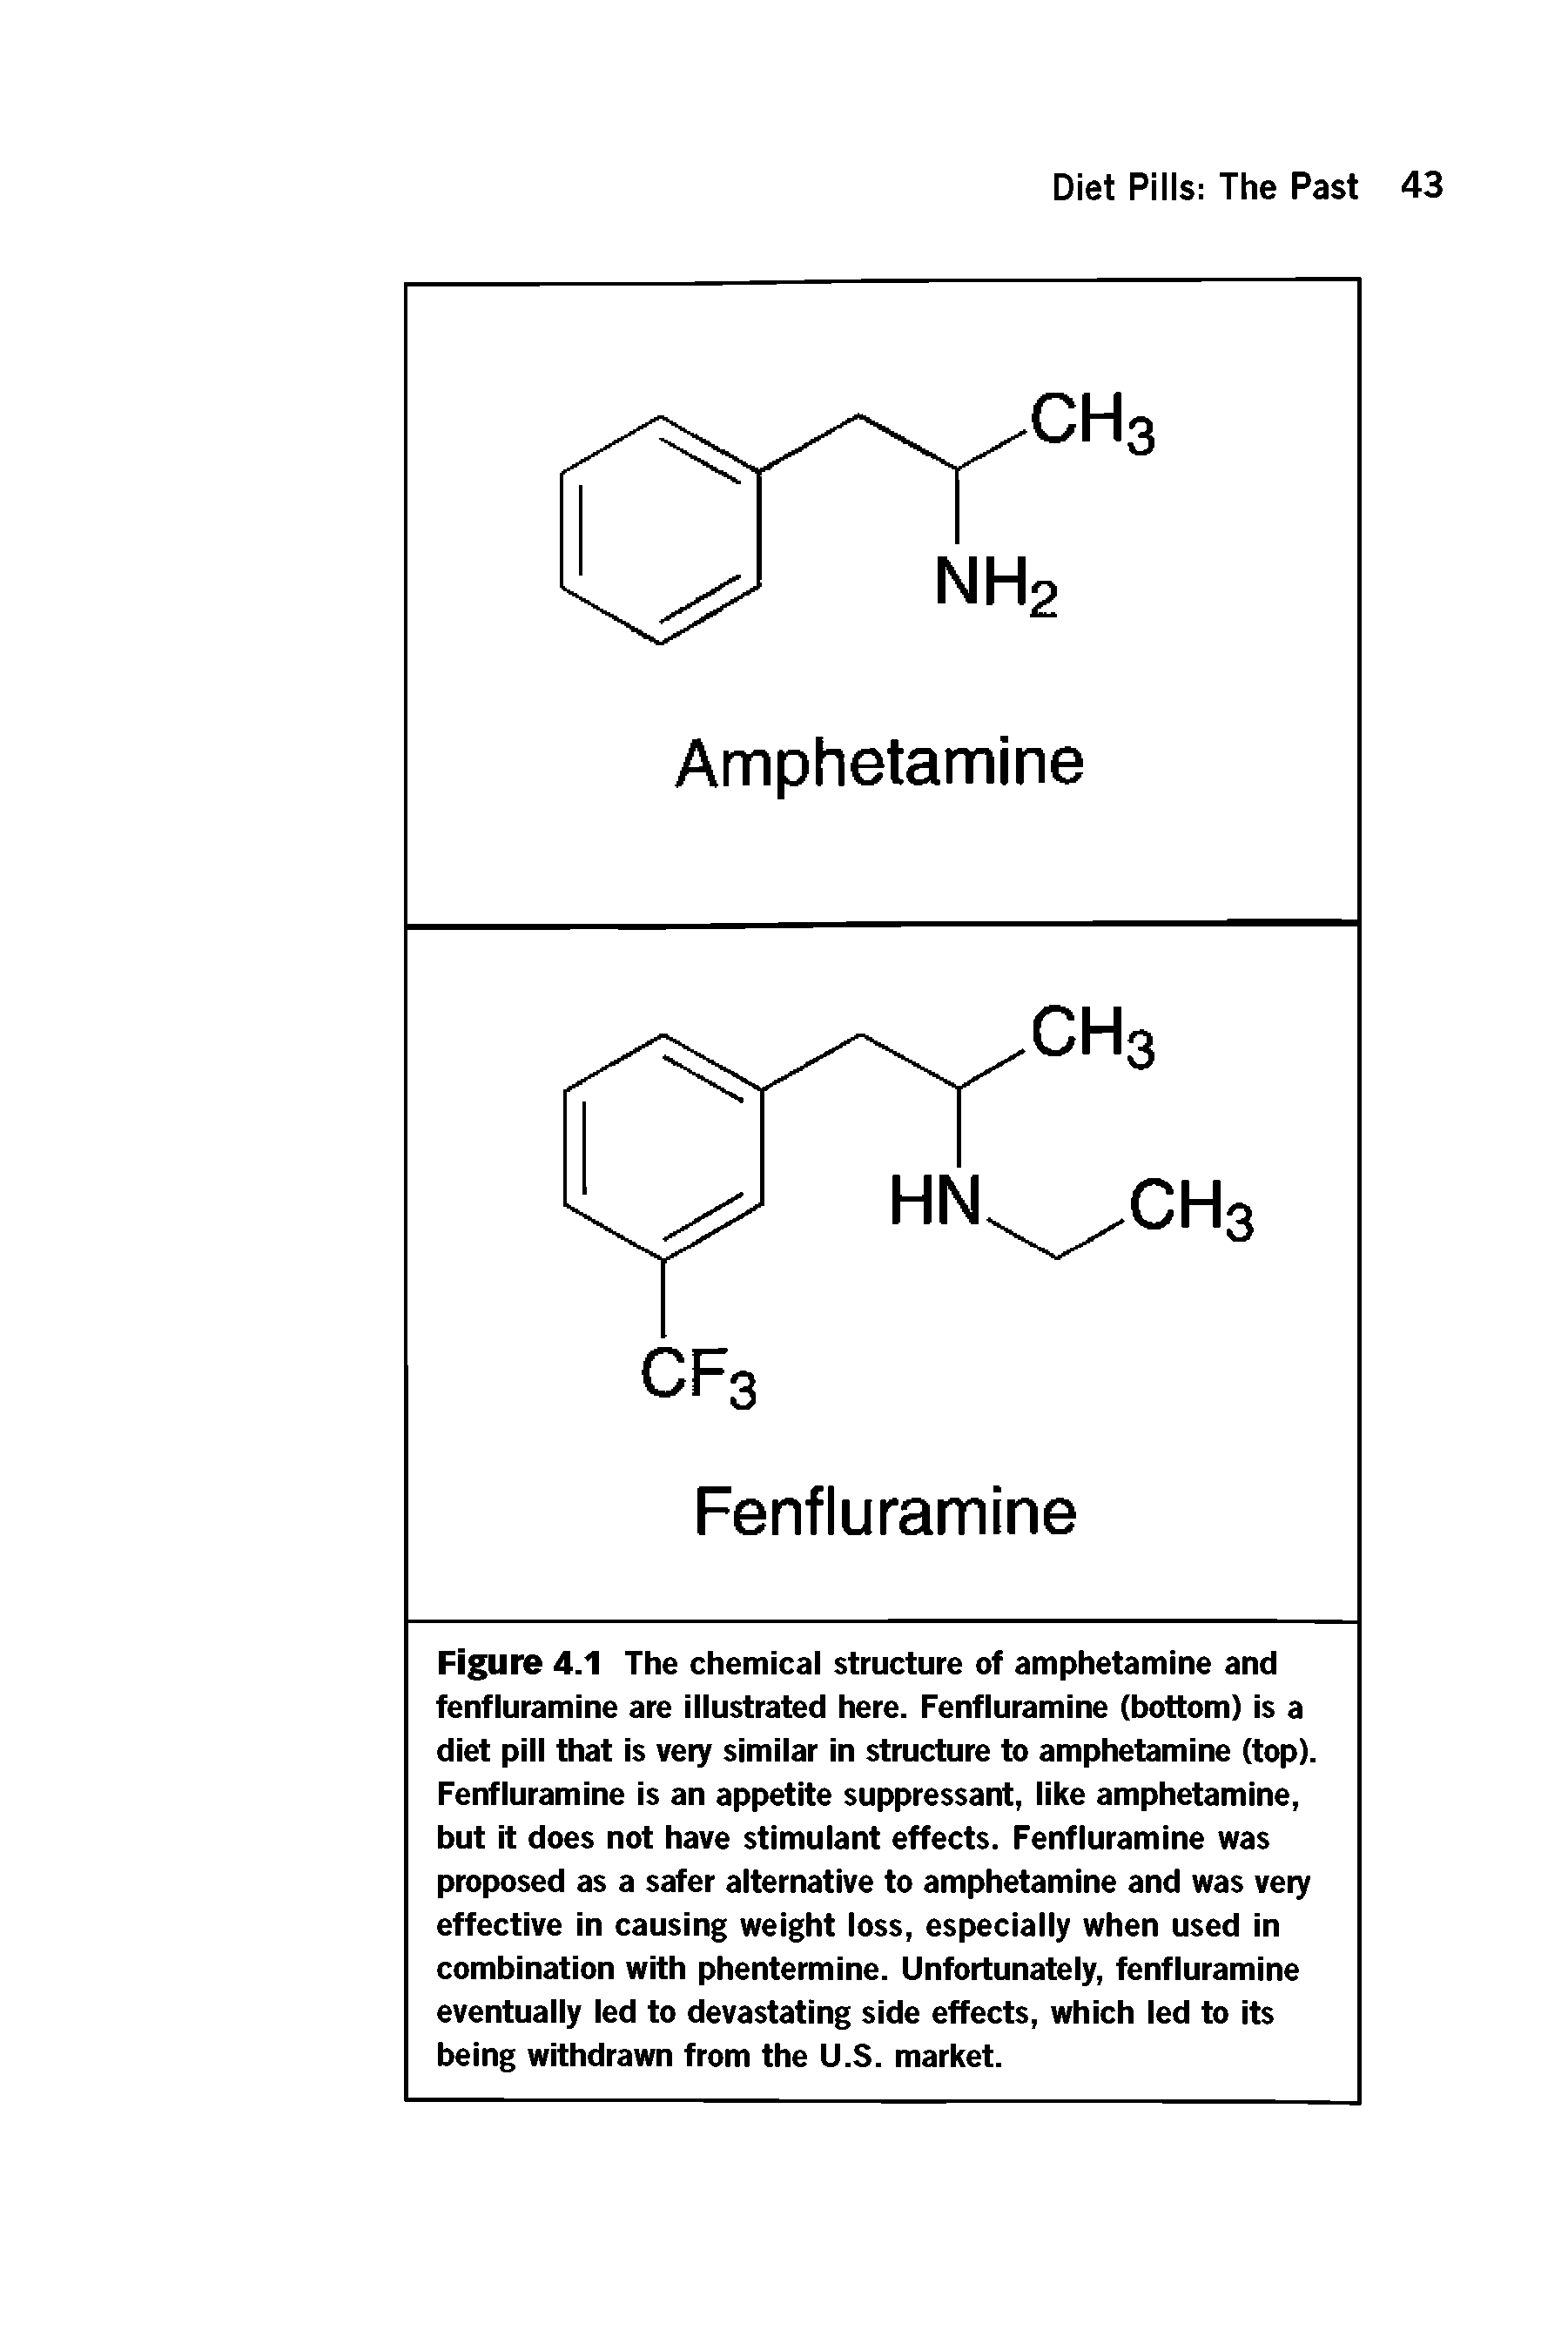 Figure 4.1 The chemical structure of amphetamine and fenfluramine are illustrated here. Fenfluramine (bottom) is a diet pill that is very similar in structure to amphetamine (top). Fenfluramine is an appetite suppressant, like amphetamine, but it does not have stimulant effects. Fenfluramine was proposed as a safer alternative to amphetamine and was very effective in causing weight loss, especially when used in combination with phentermine. Unfortunately, fenfluramine eventually led to devastating side effects, which led to its being withdrawn from the U.S. market.